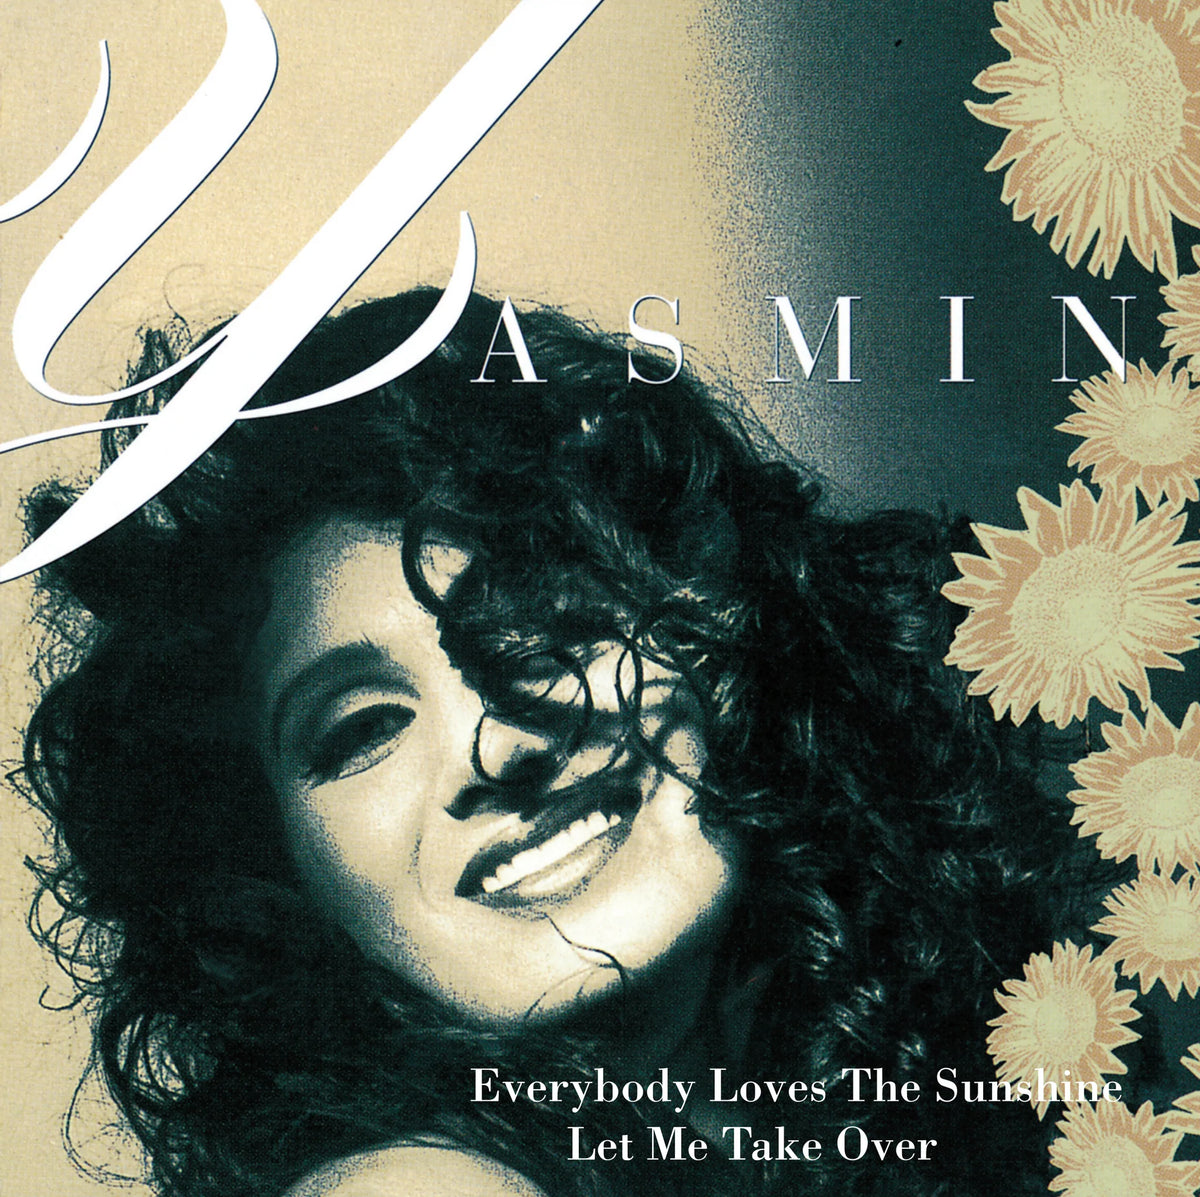 Yasmin - Everybody Loves the Sunshine b/w Let Me Take Over